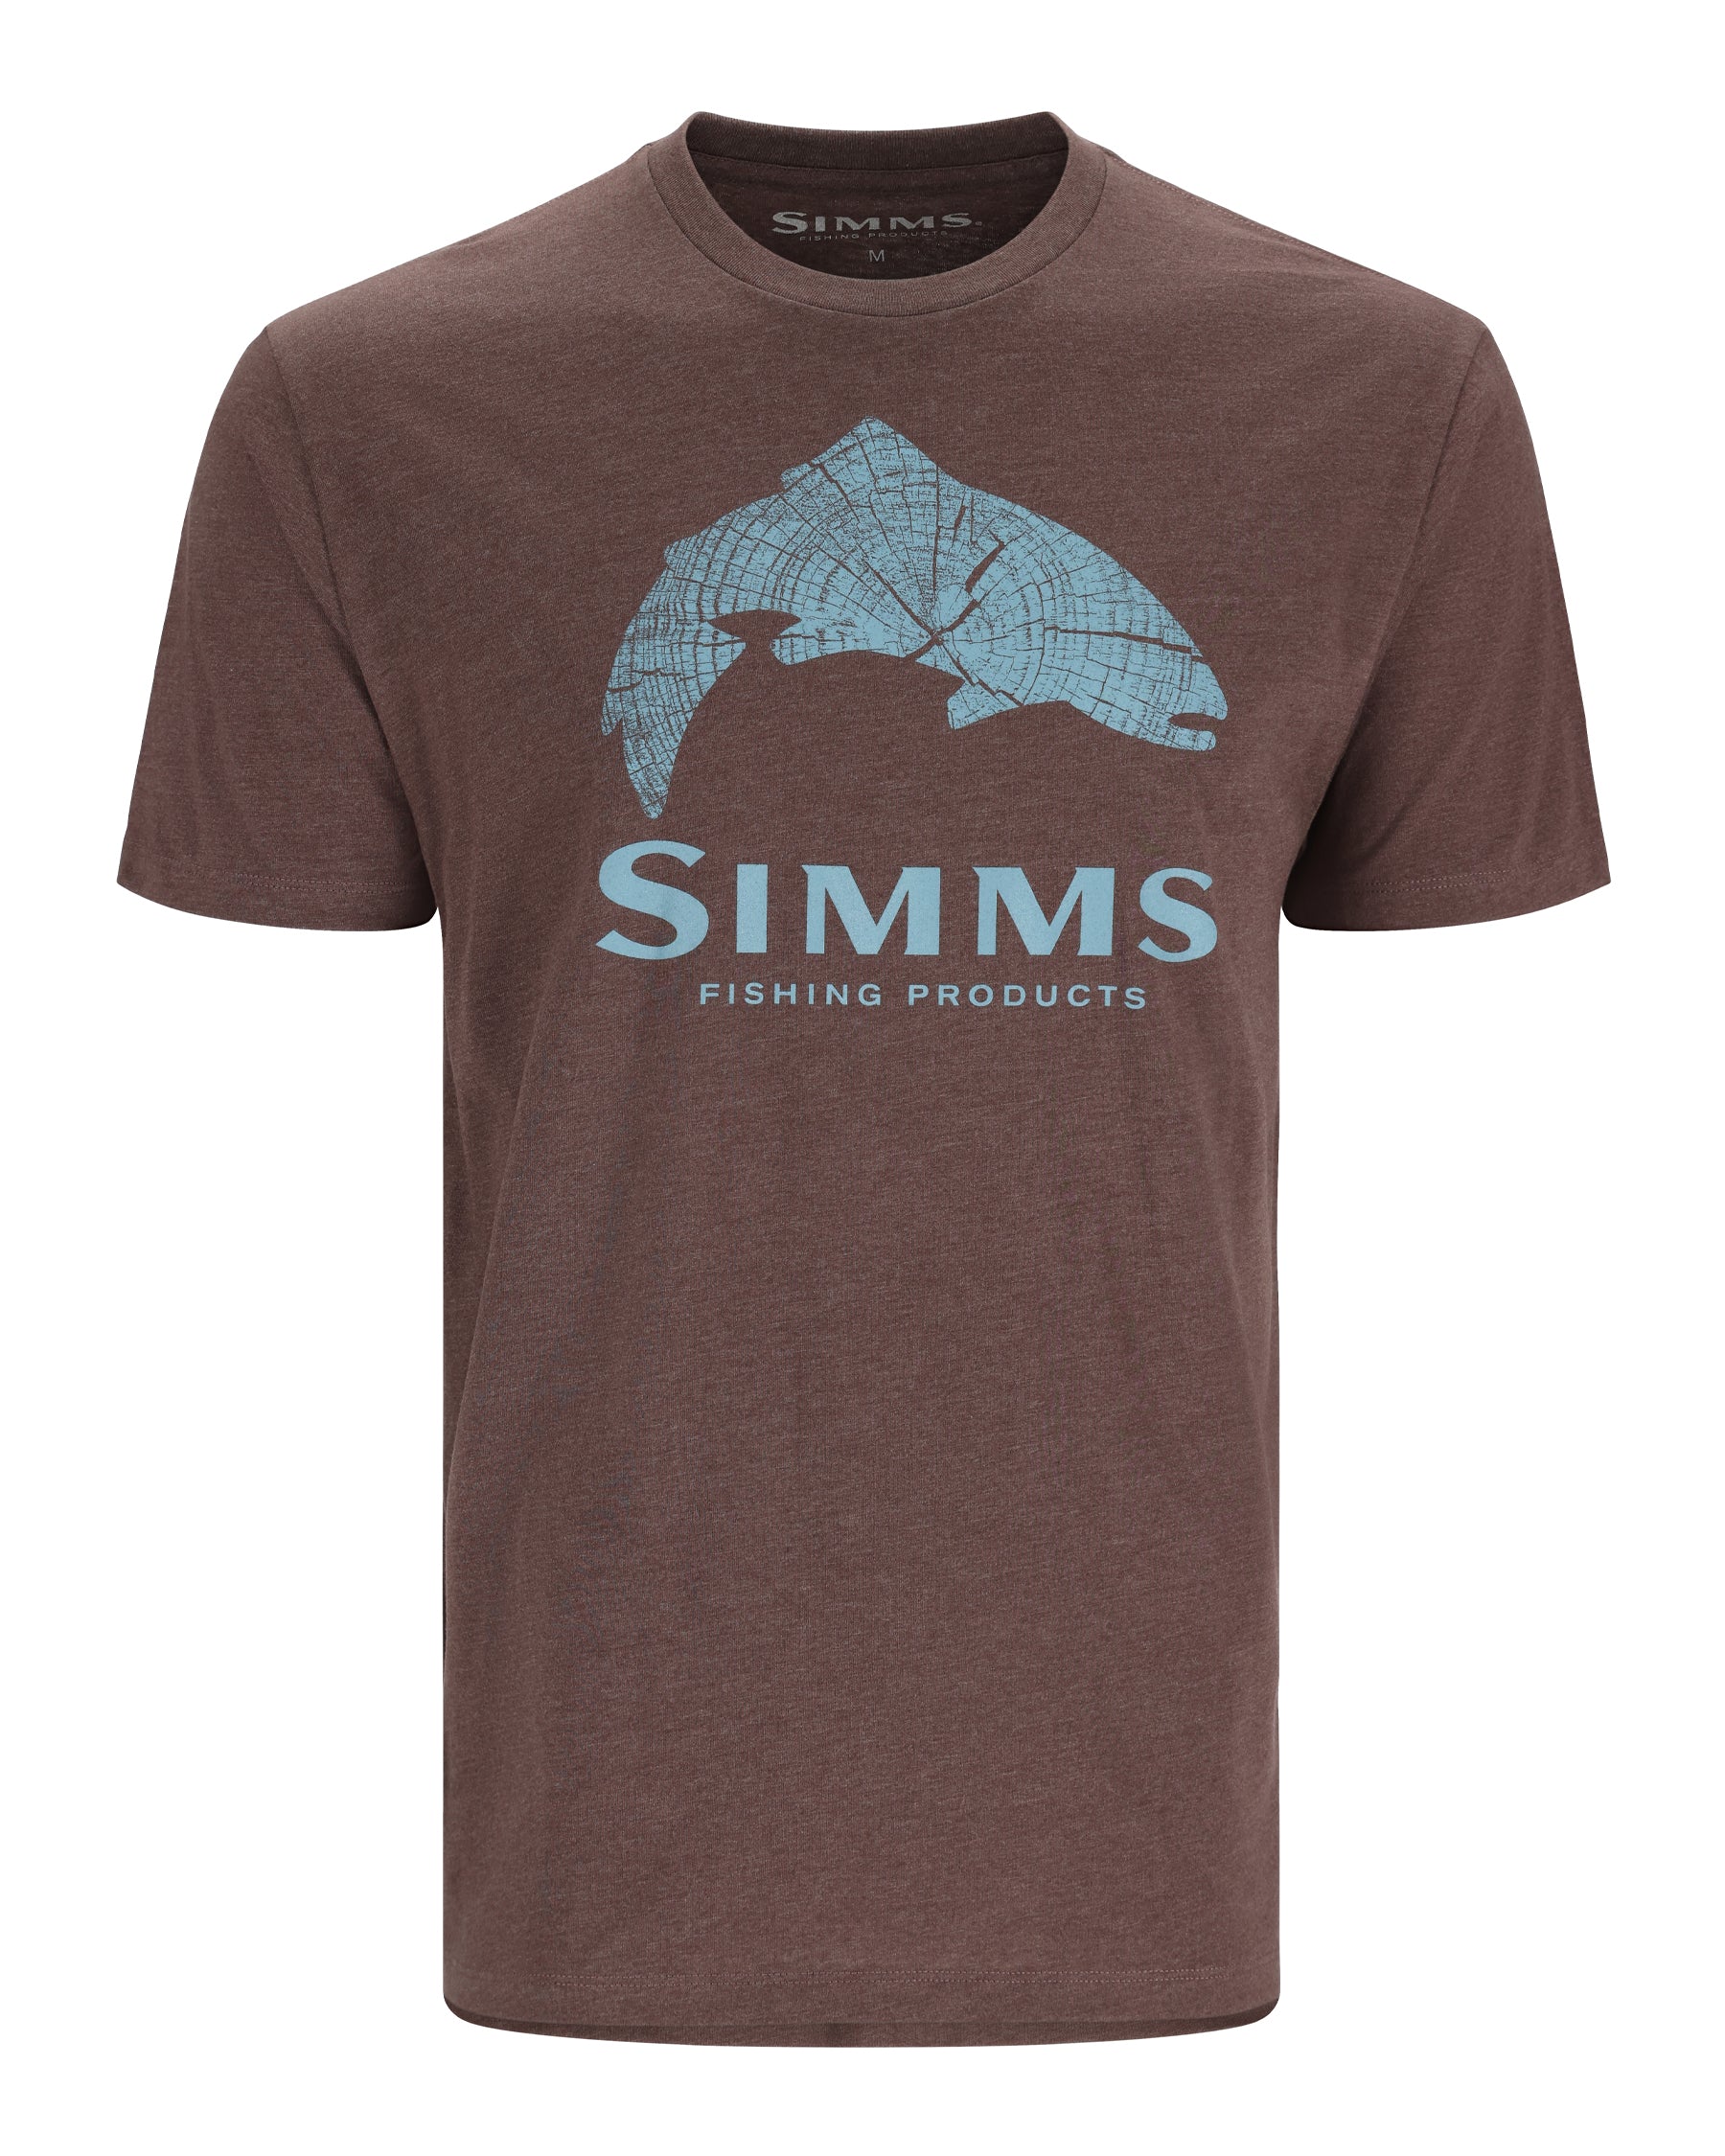 Simms Fishing Products Men's Wood Trout Fill T-Shirt